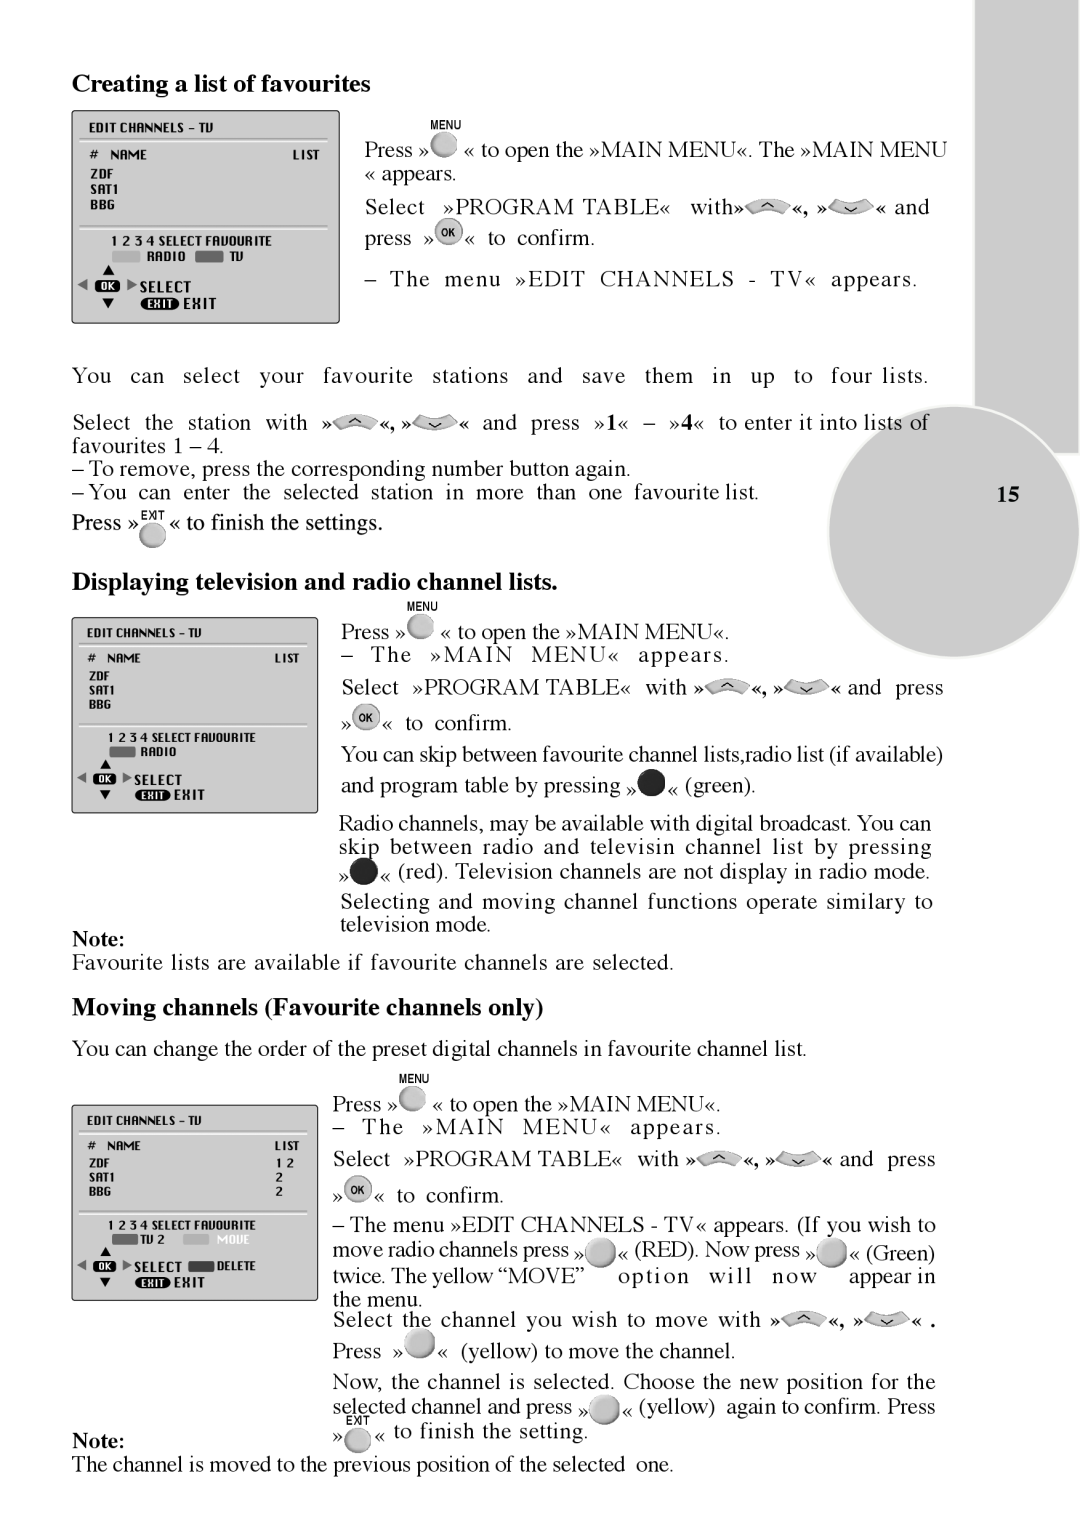 Beko 28C769IDS operating instructions Creating a list of favourites, Displaying television and radio channel lists, press 